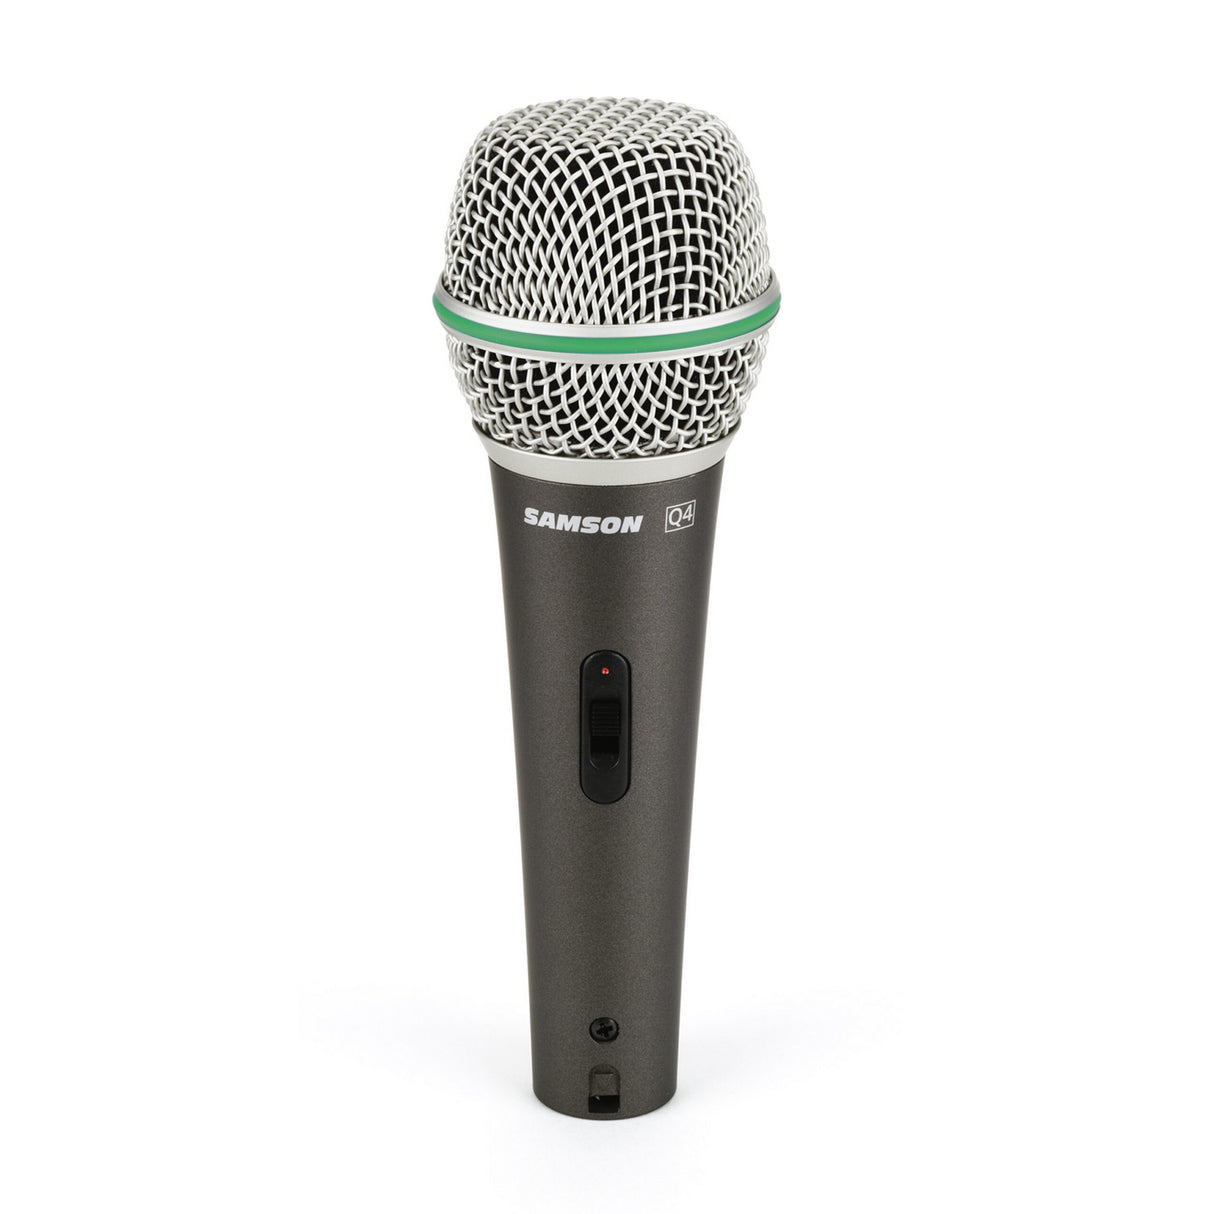 Samson Q4 Dynamic Supercardioid Handheld Microphone with XLR Cable, Clip and Case